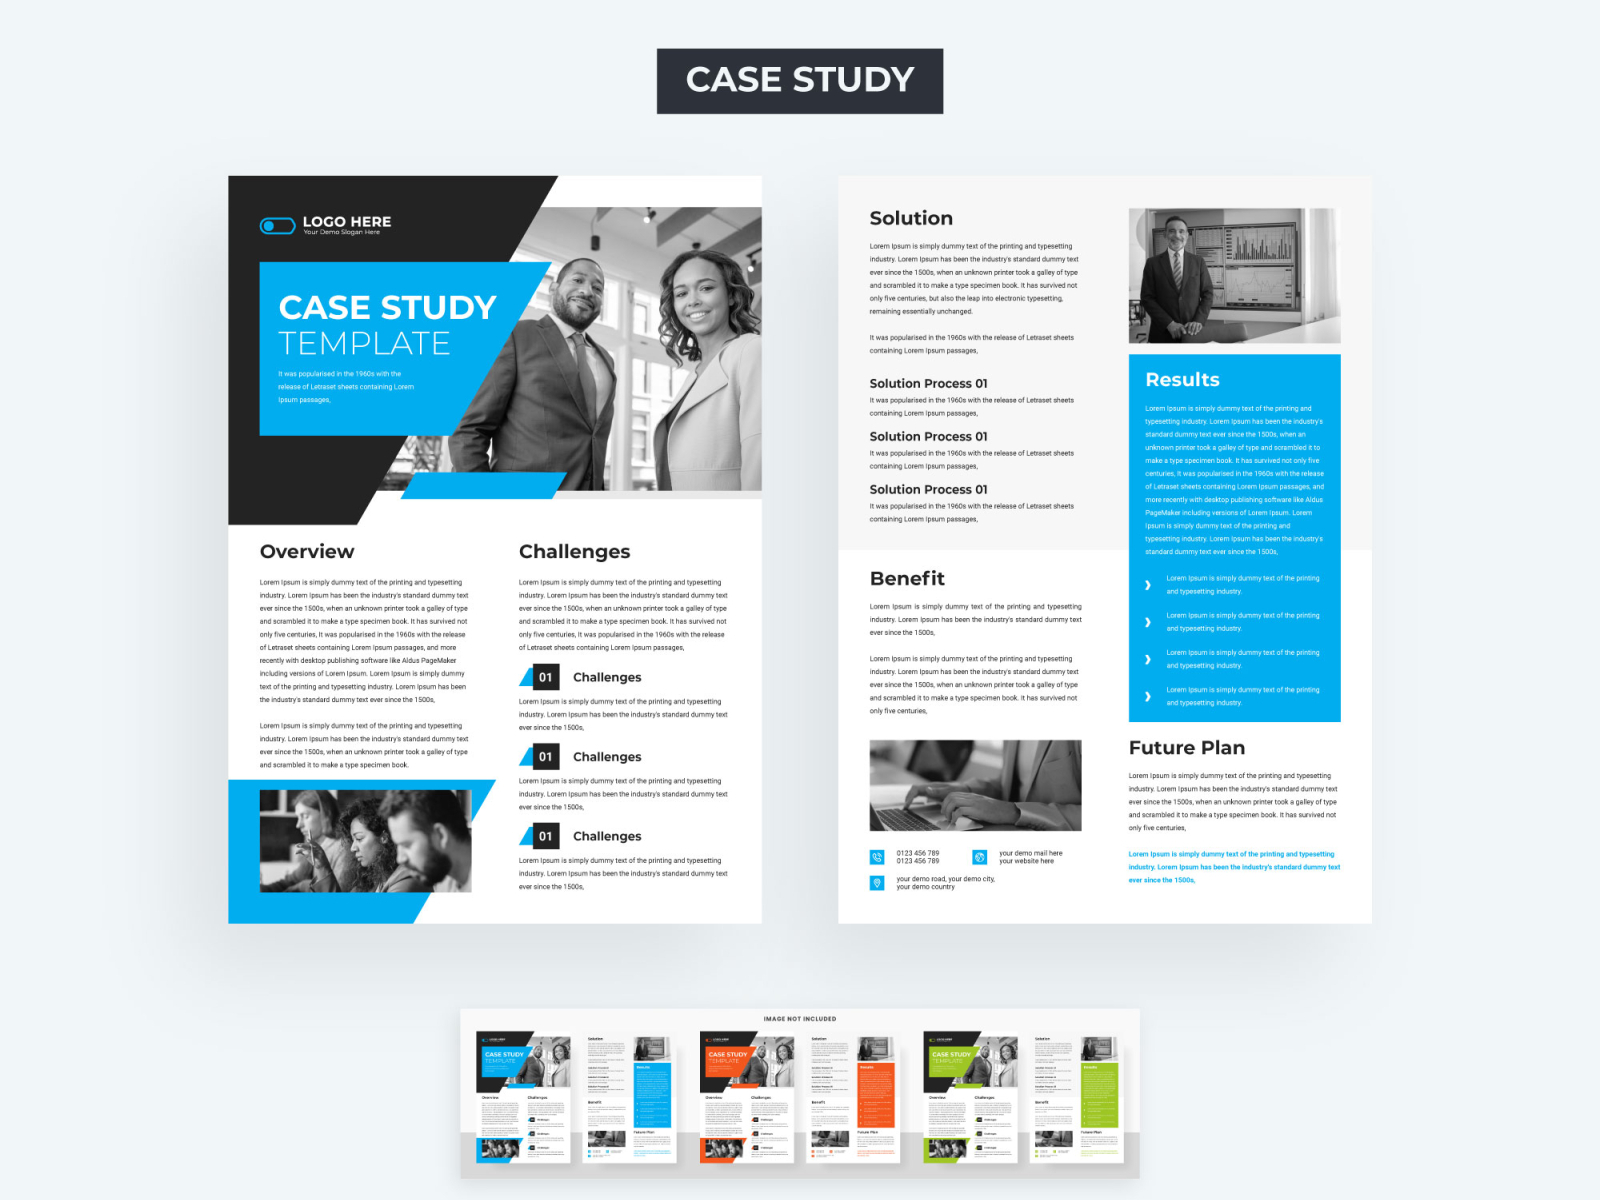 Case study flyer template by Tanmoy Topu on Dribbble